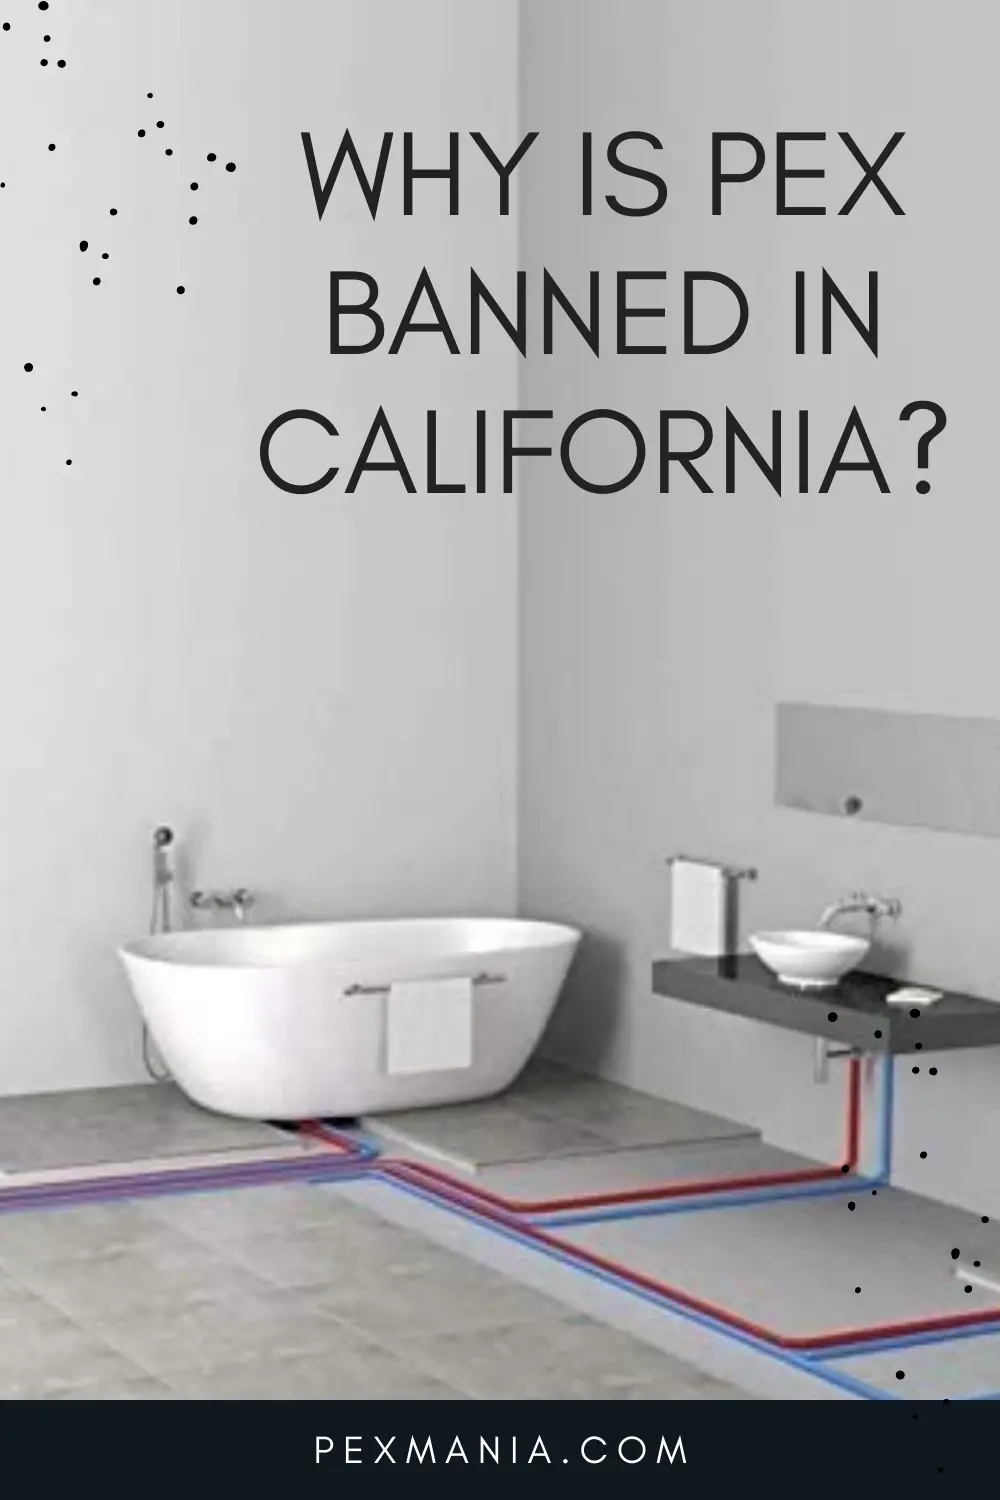 Why Is PEX Banned in California